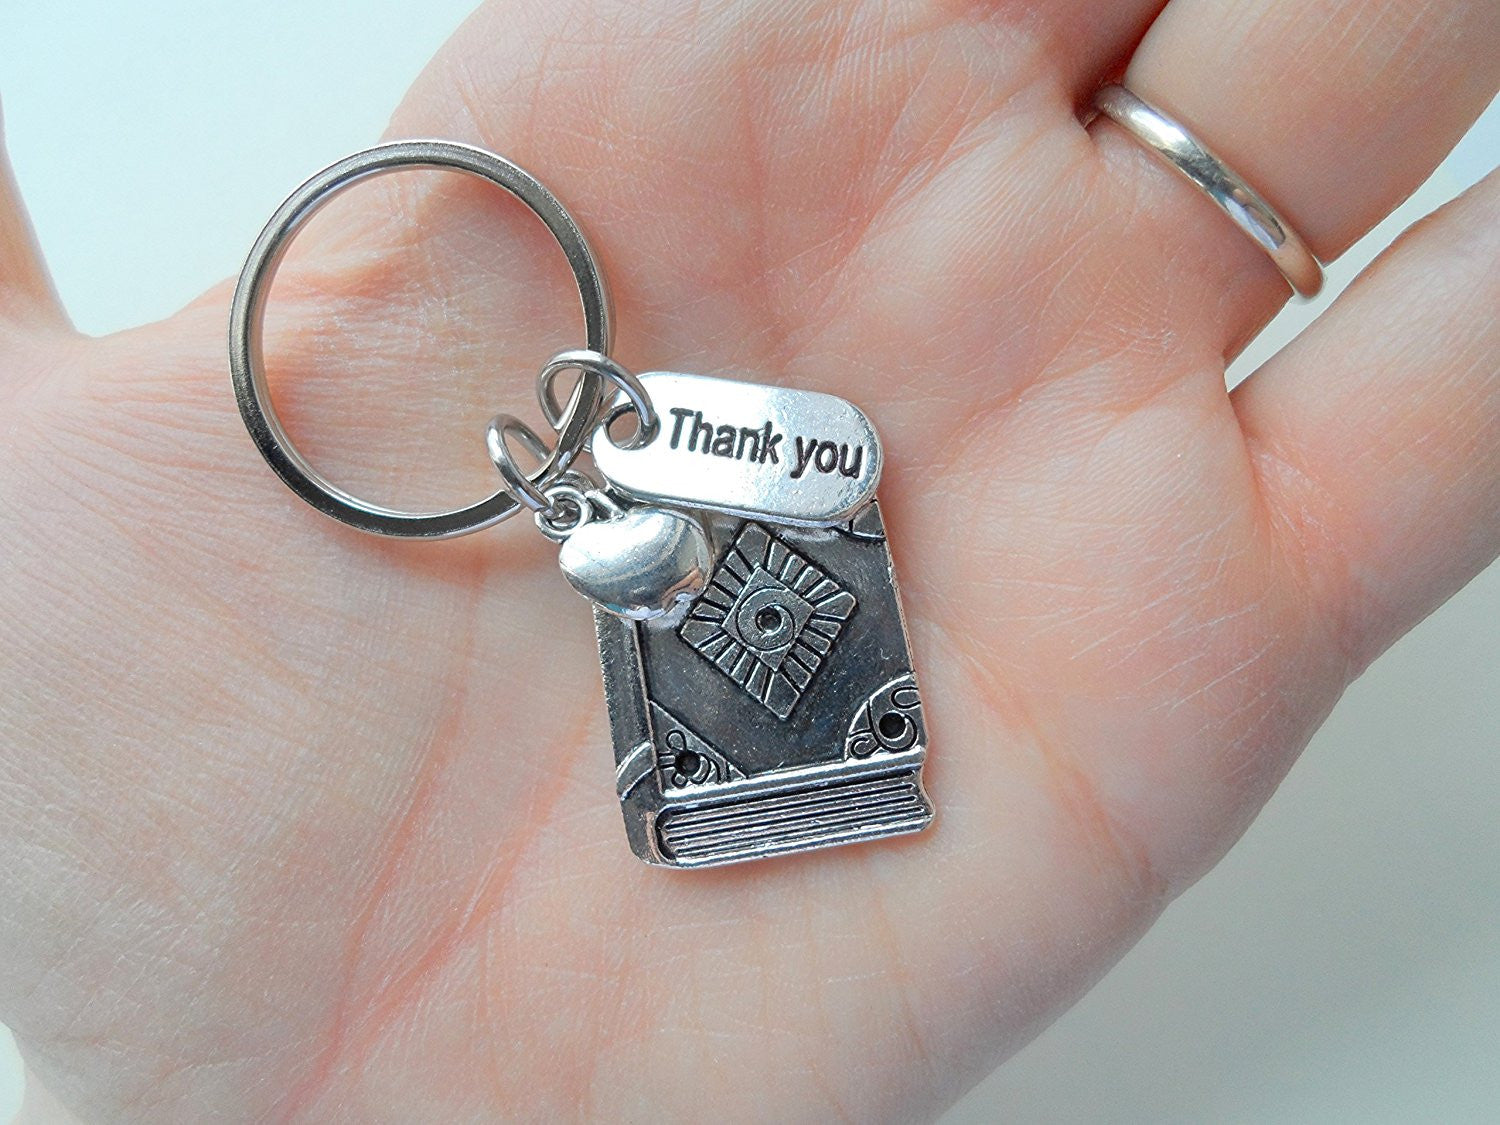 JewelryEveryday Volunteer Appreciation Gifts | Thank You Silver Clock Keychain by JE Silver 50+